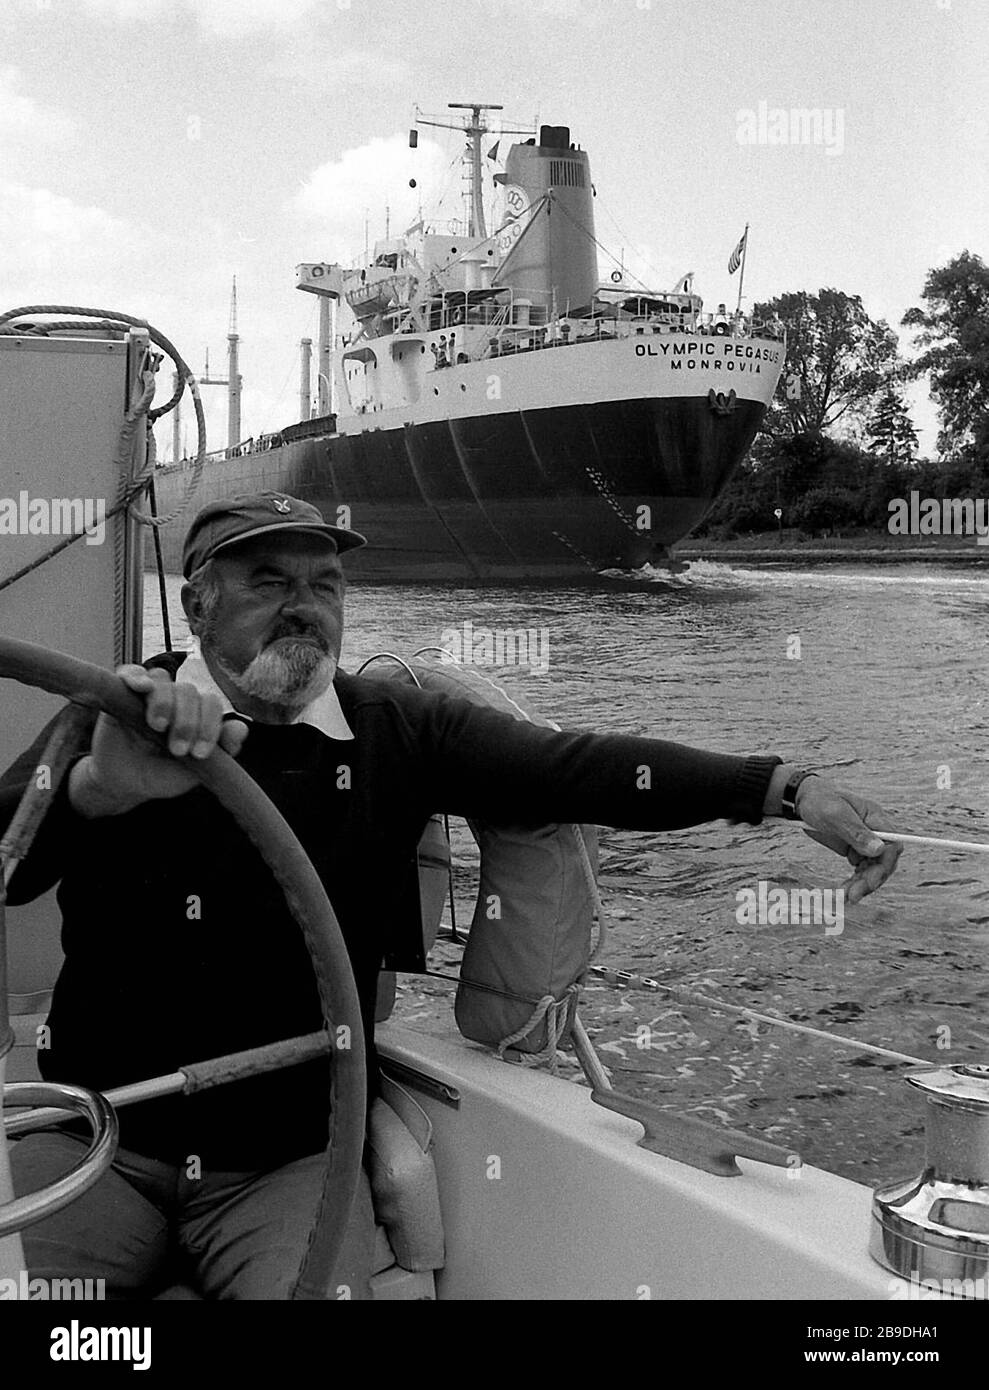 A man with beard and cap steers a boat through the Kiel Canal. In the background you can see a cargo ship. [automated translation] Stock Photo